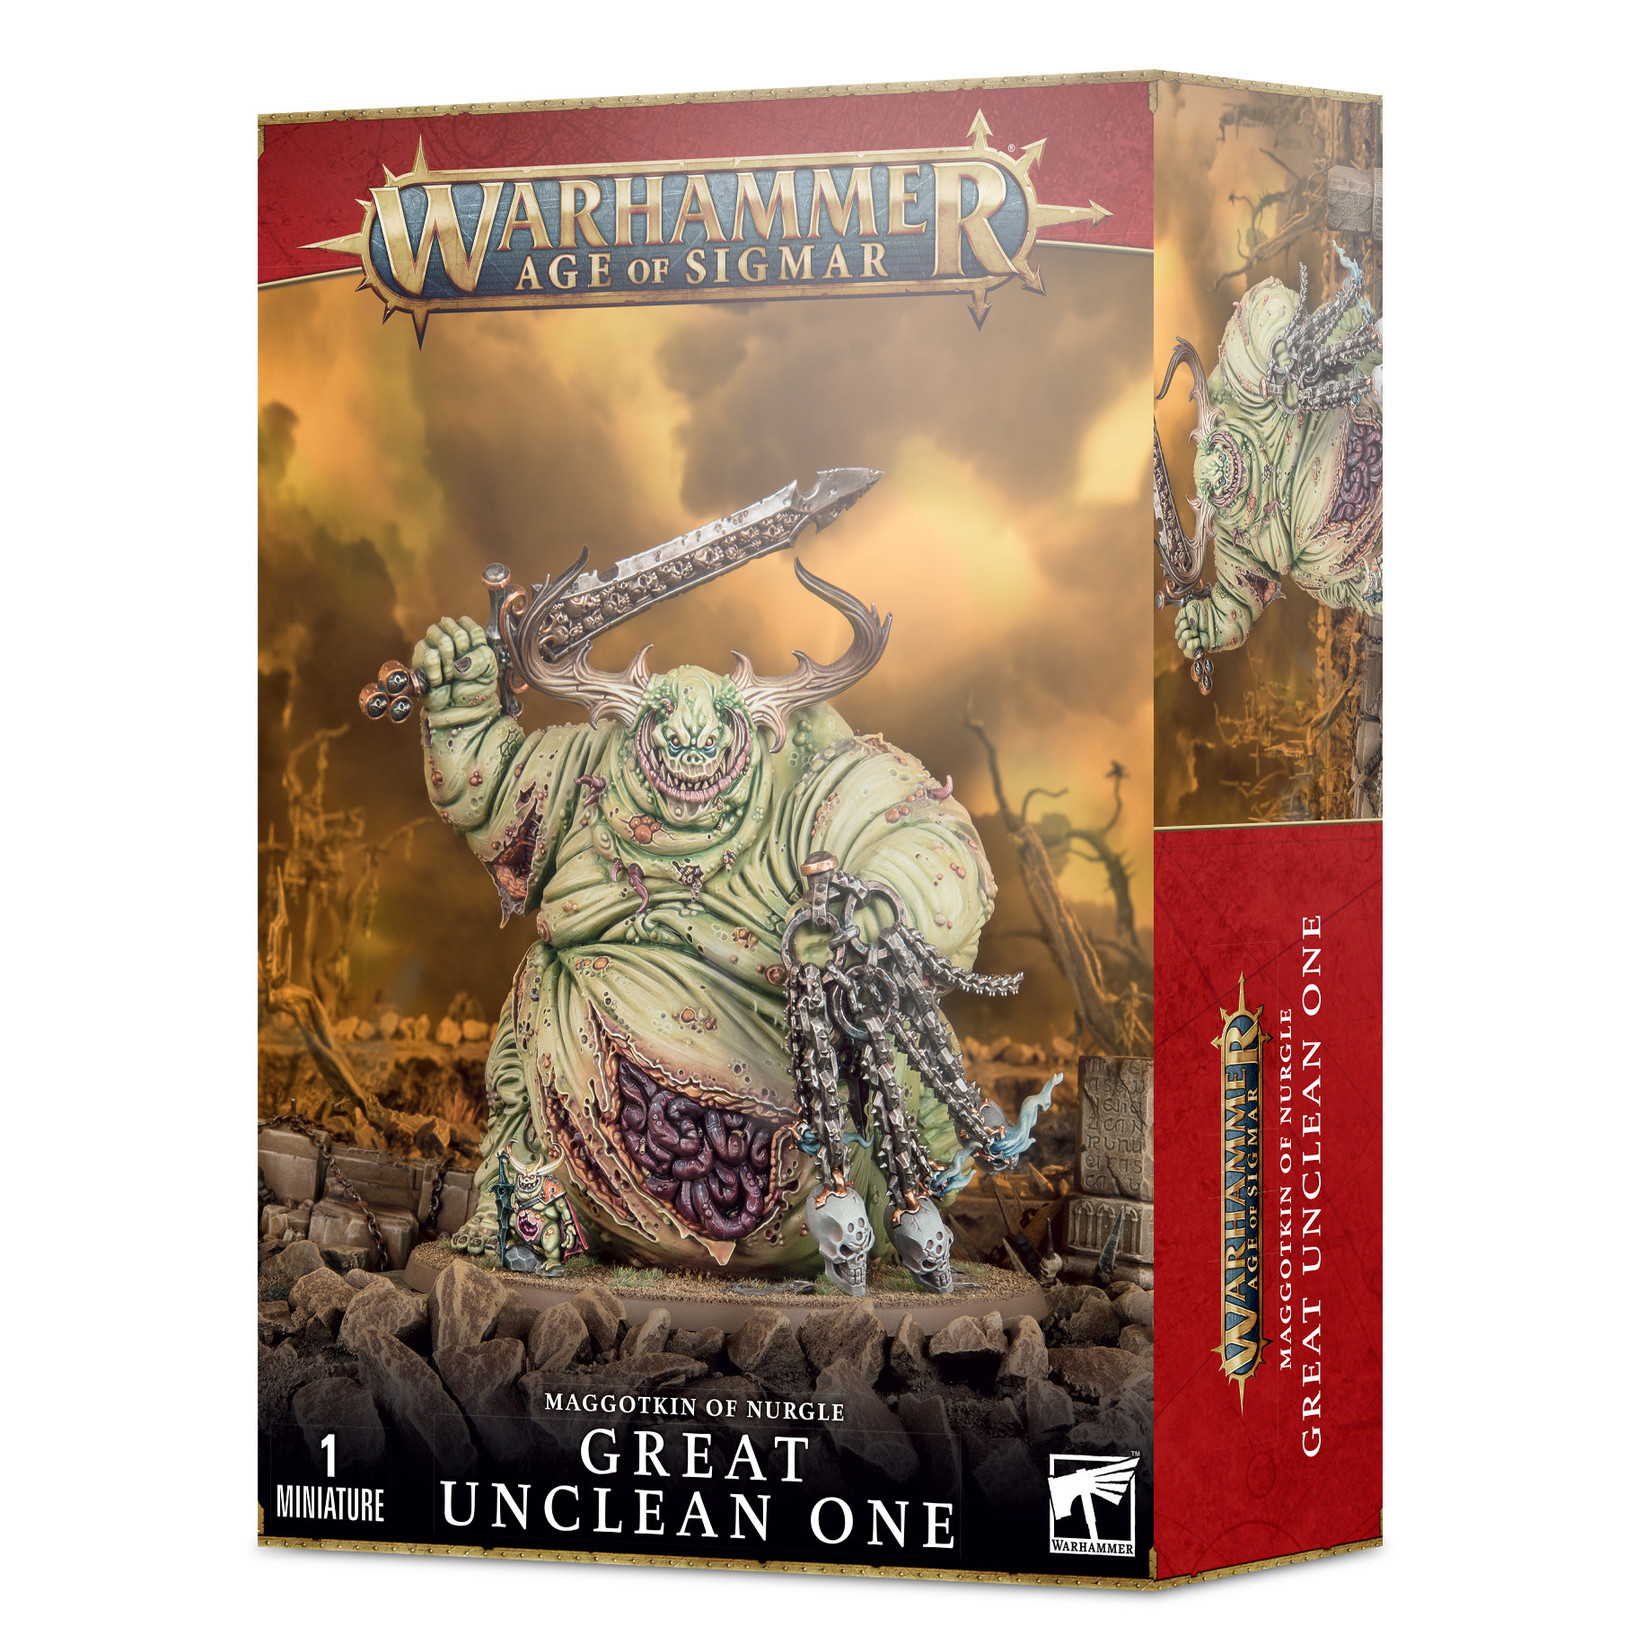 Games Workshop Warhammer Age of Sigmar Chaos Daemons of Nurgle Great Unclean One